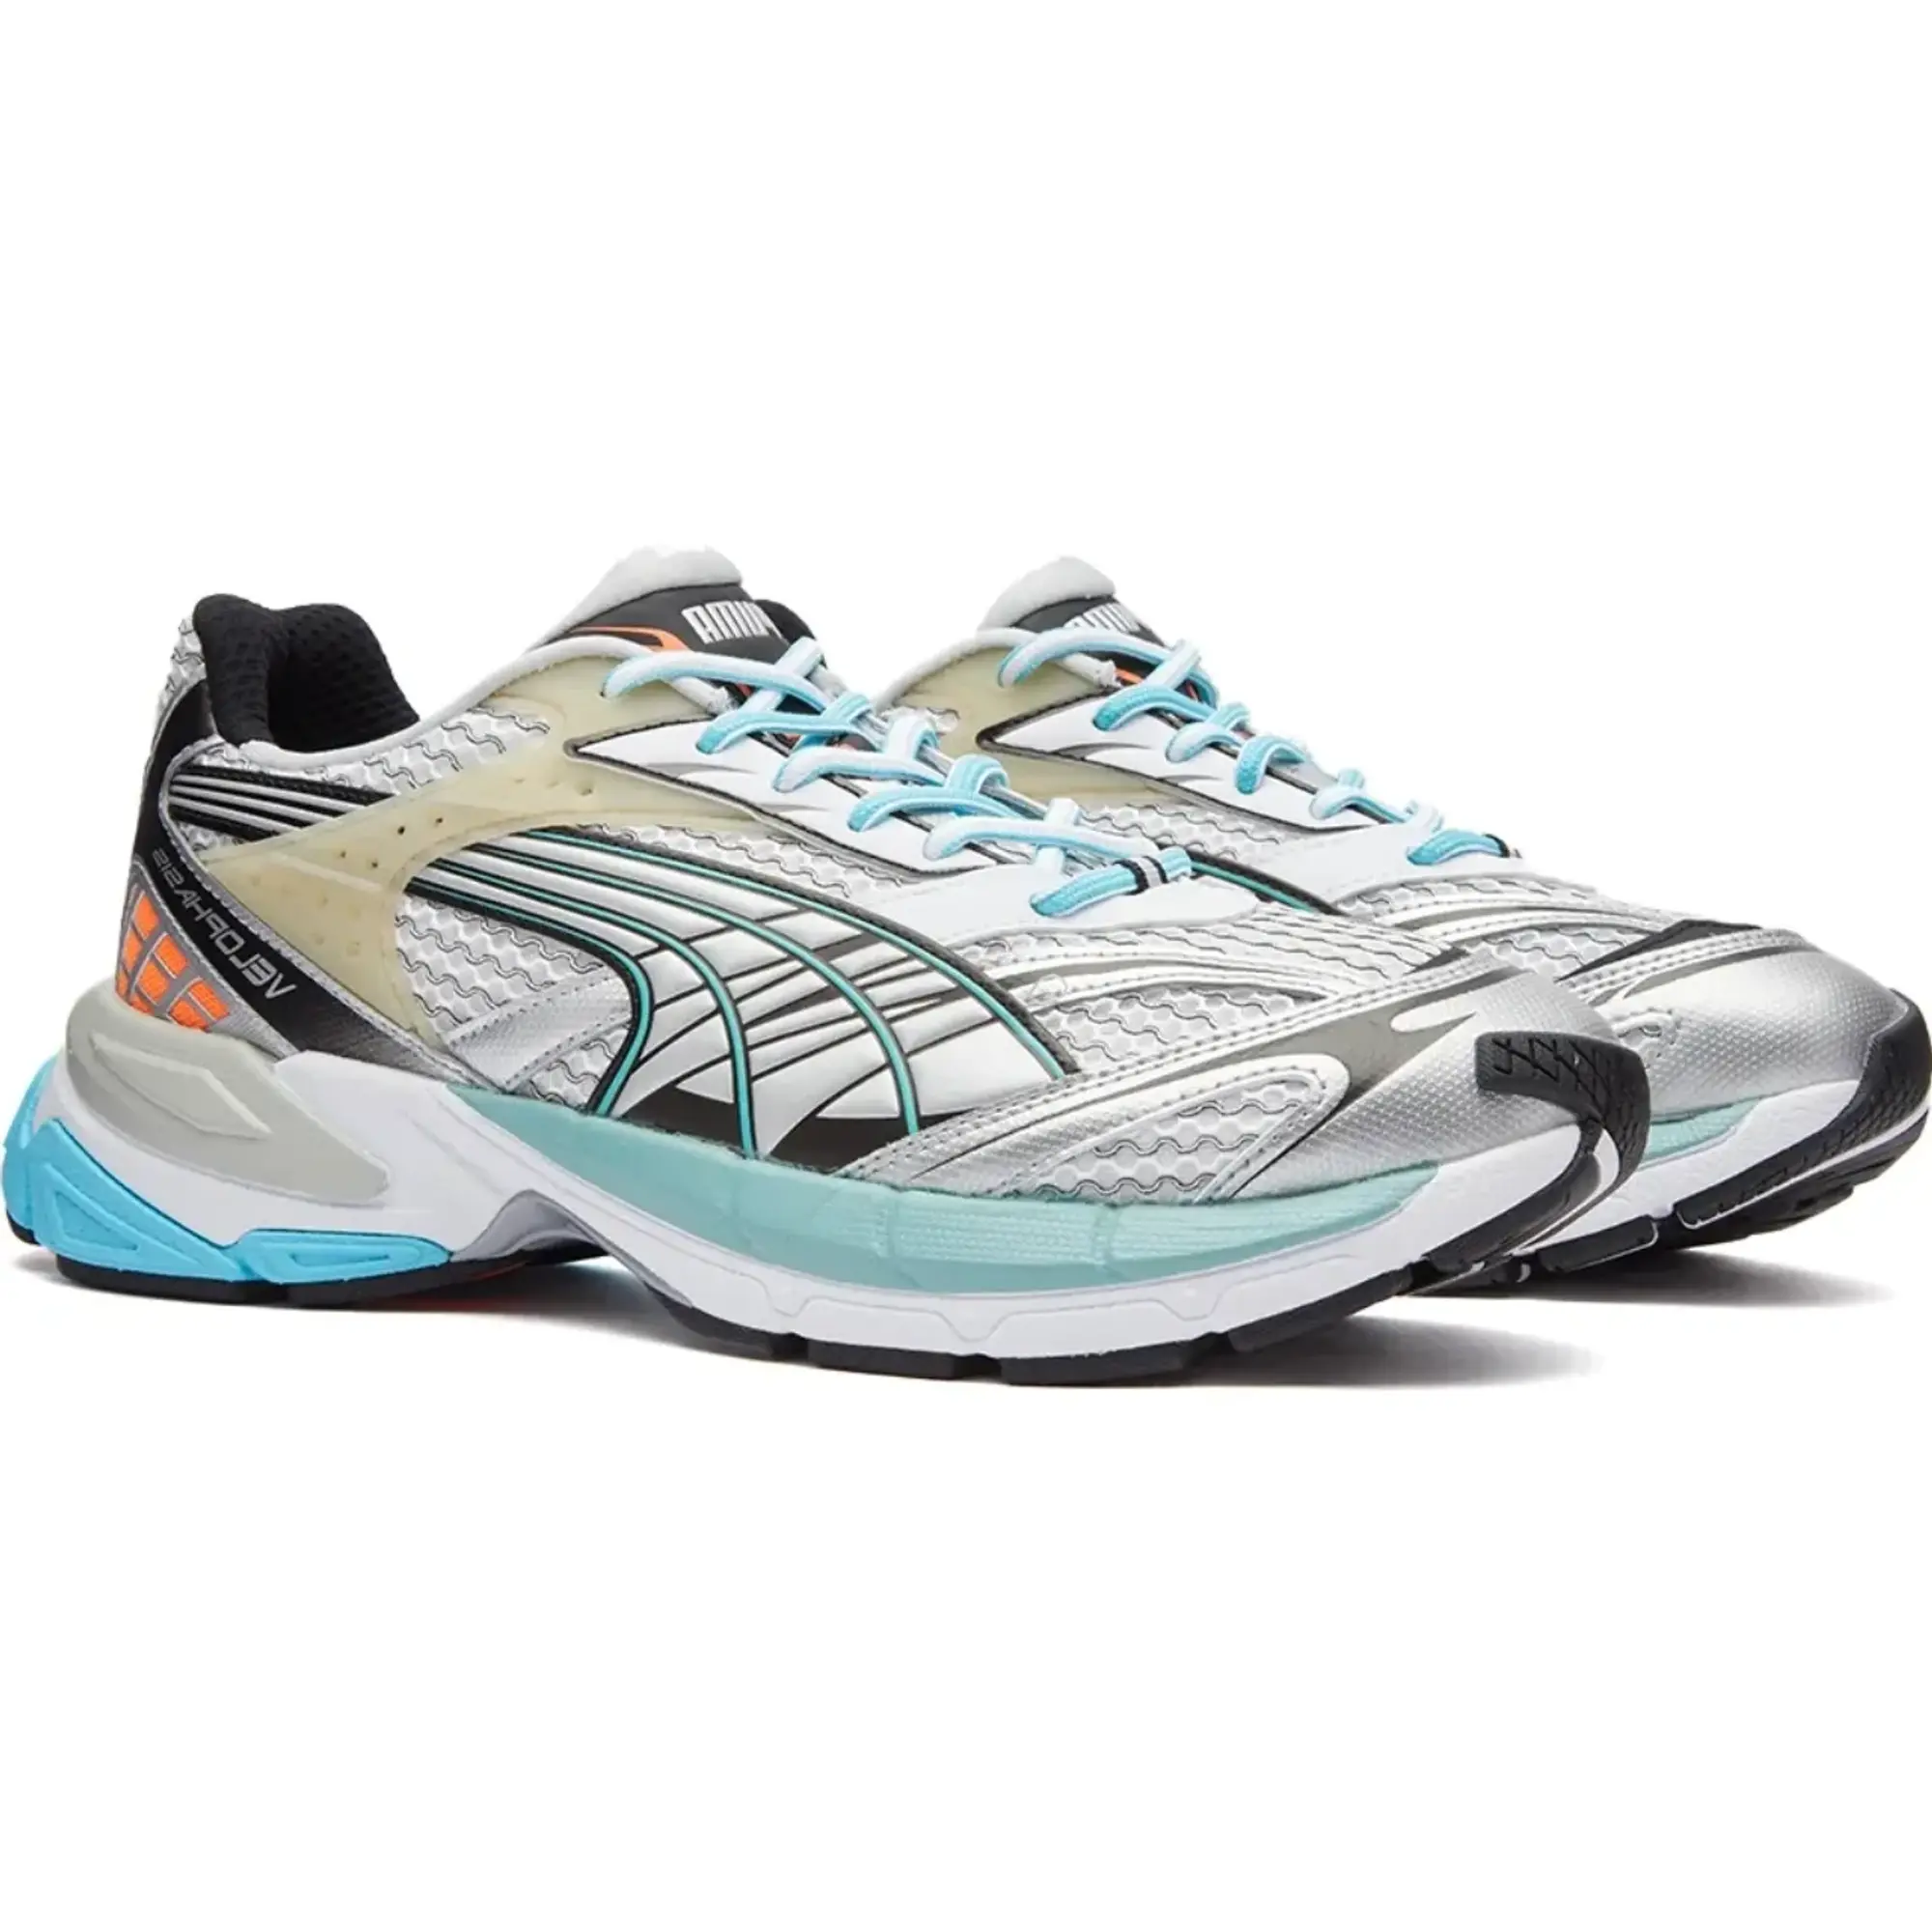 Puma Velophasis Phased Women's, Silver